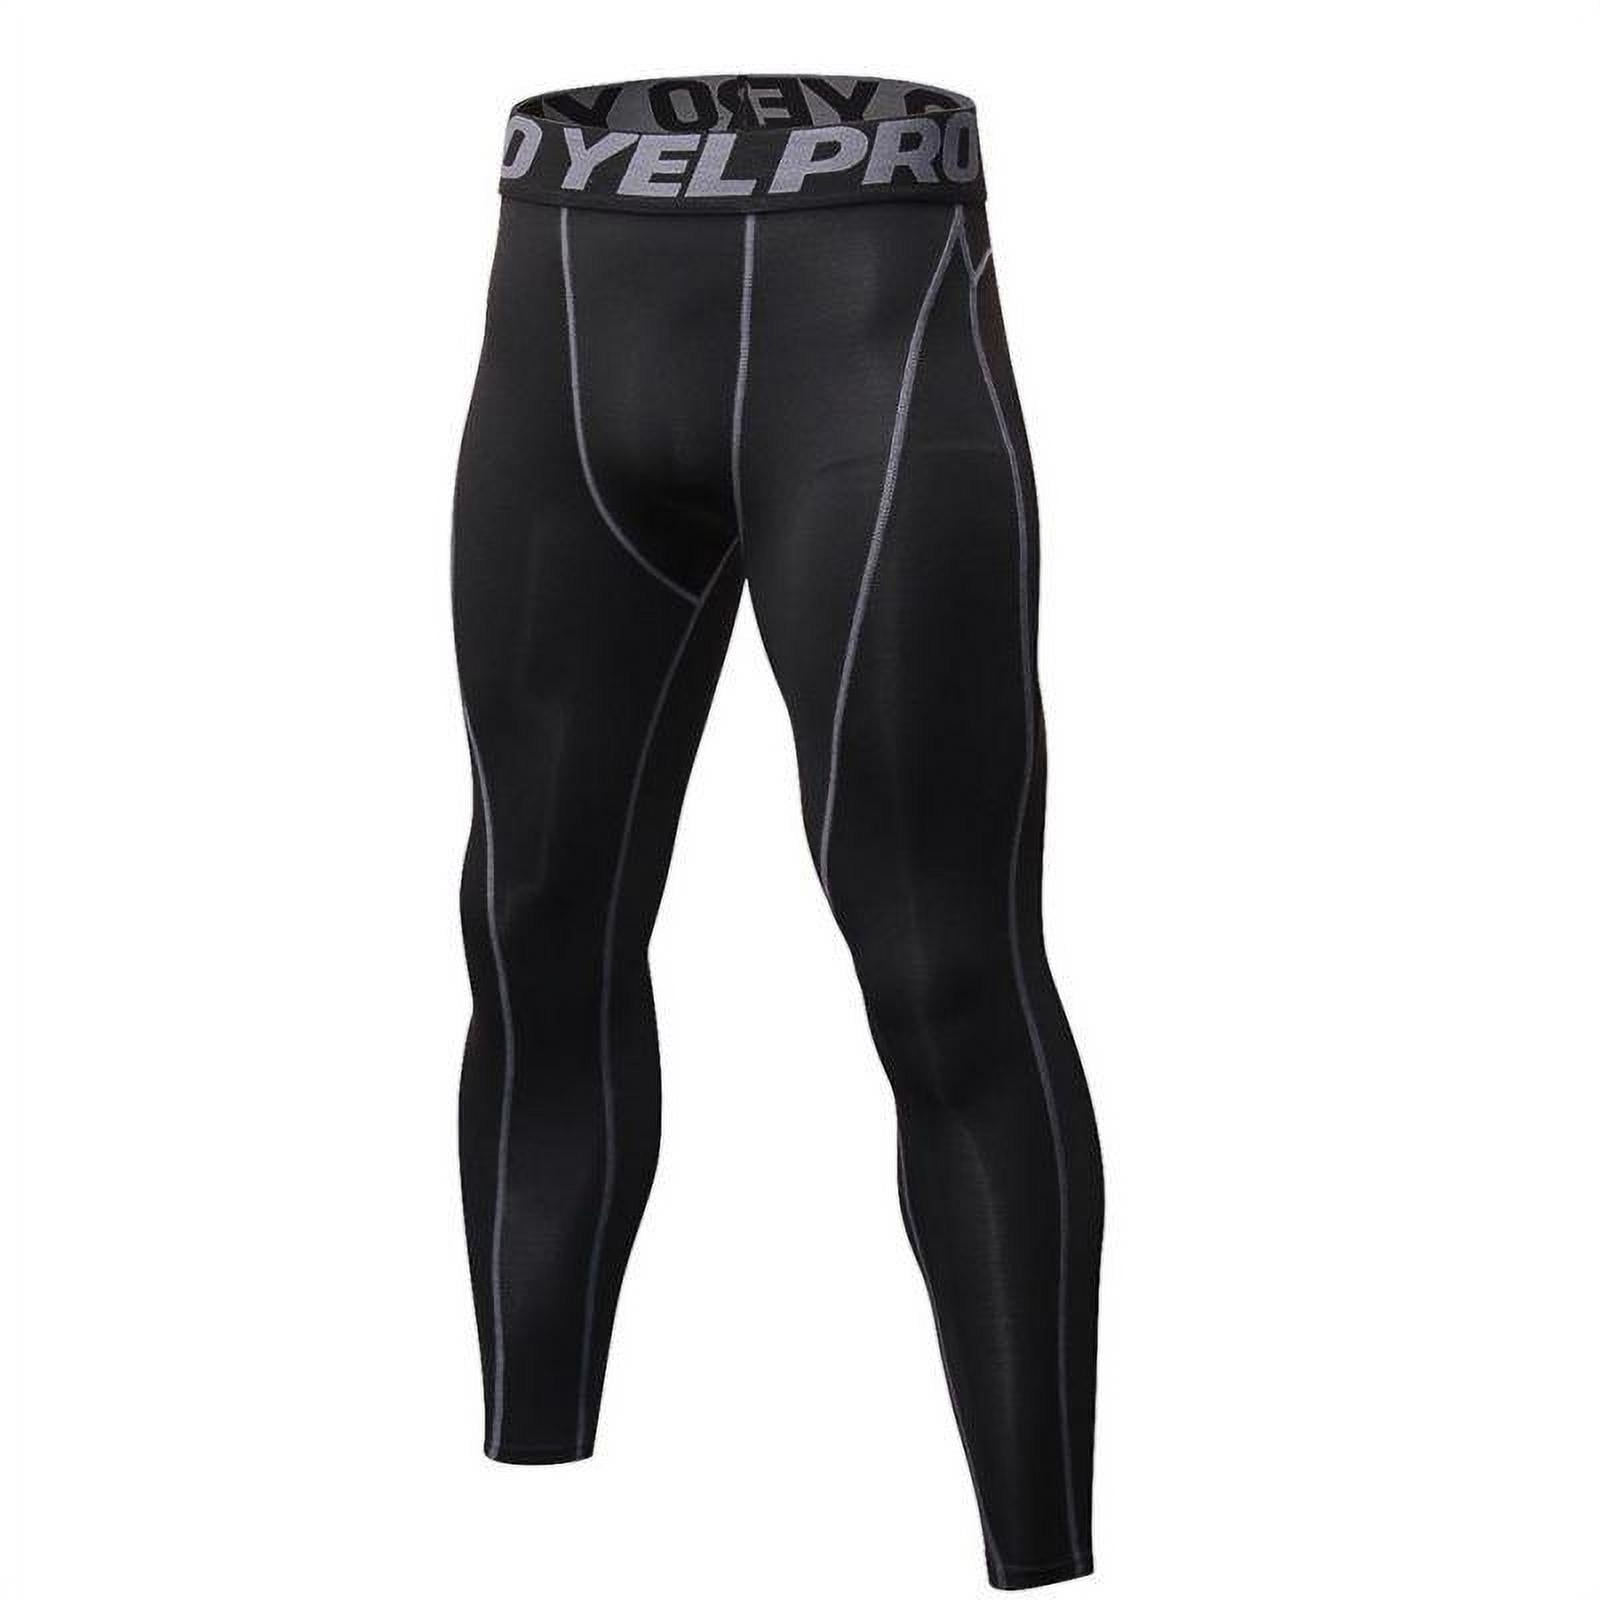 Qlans Men Running Tights High Waisted Winter Cyling Pants Workout Running Sports Leggings